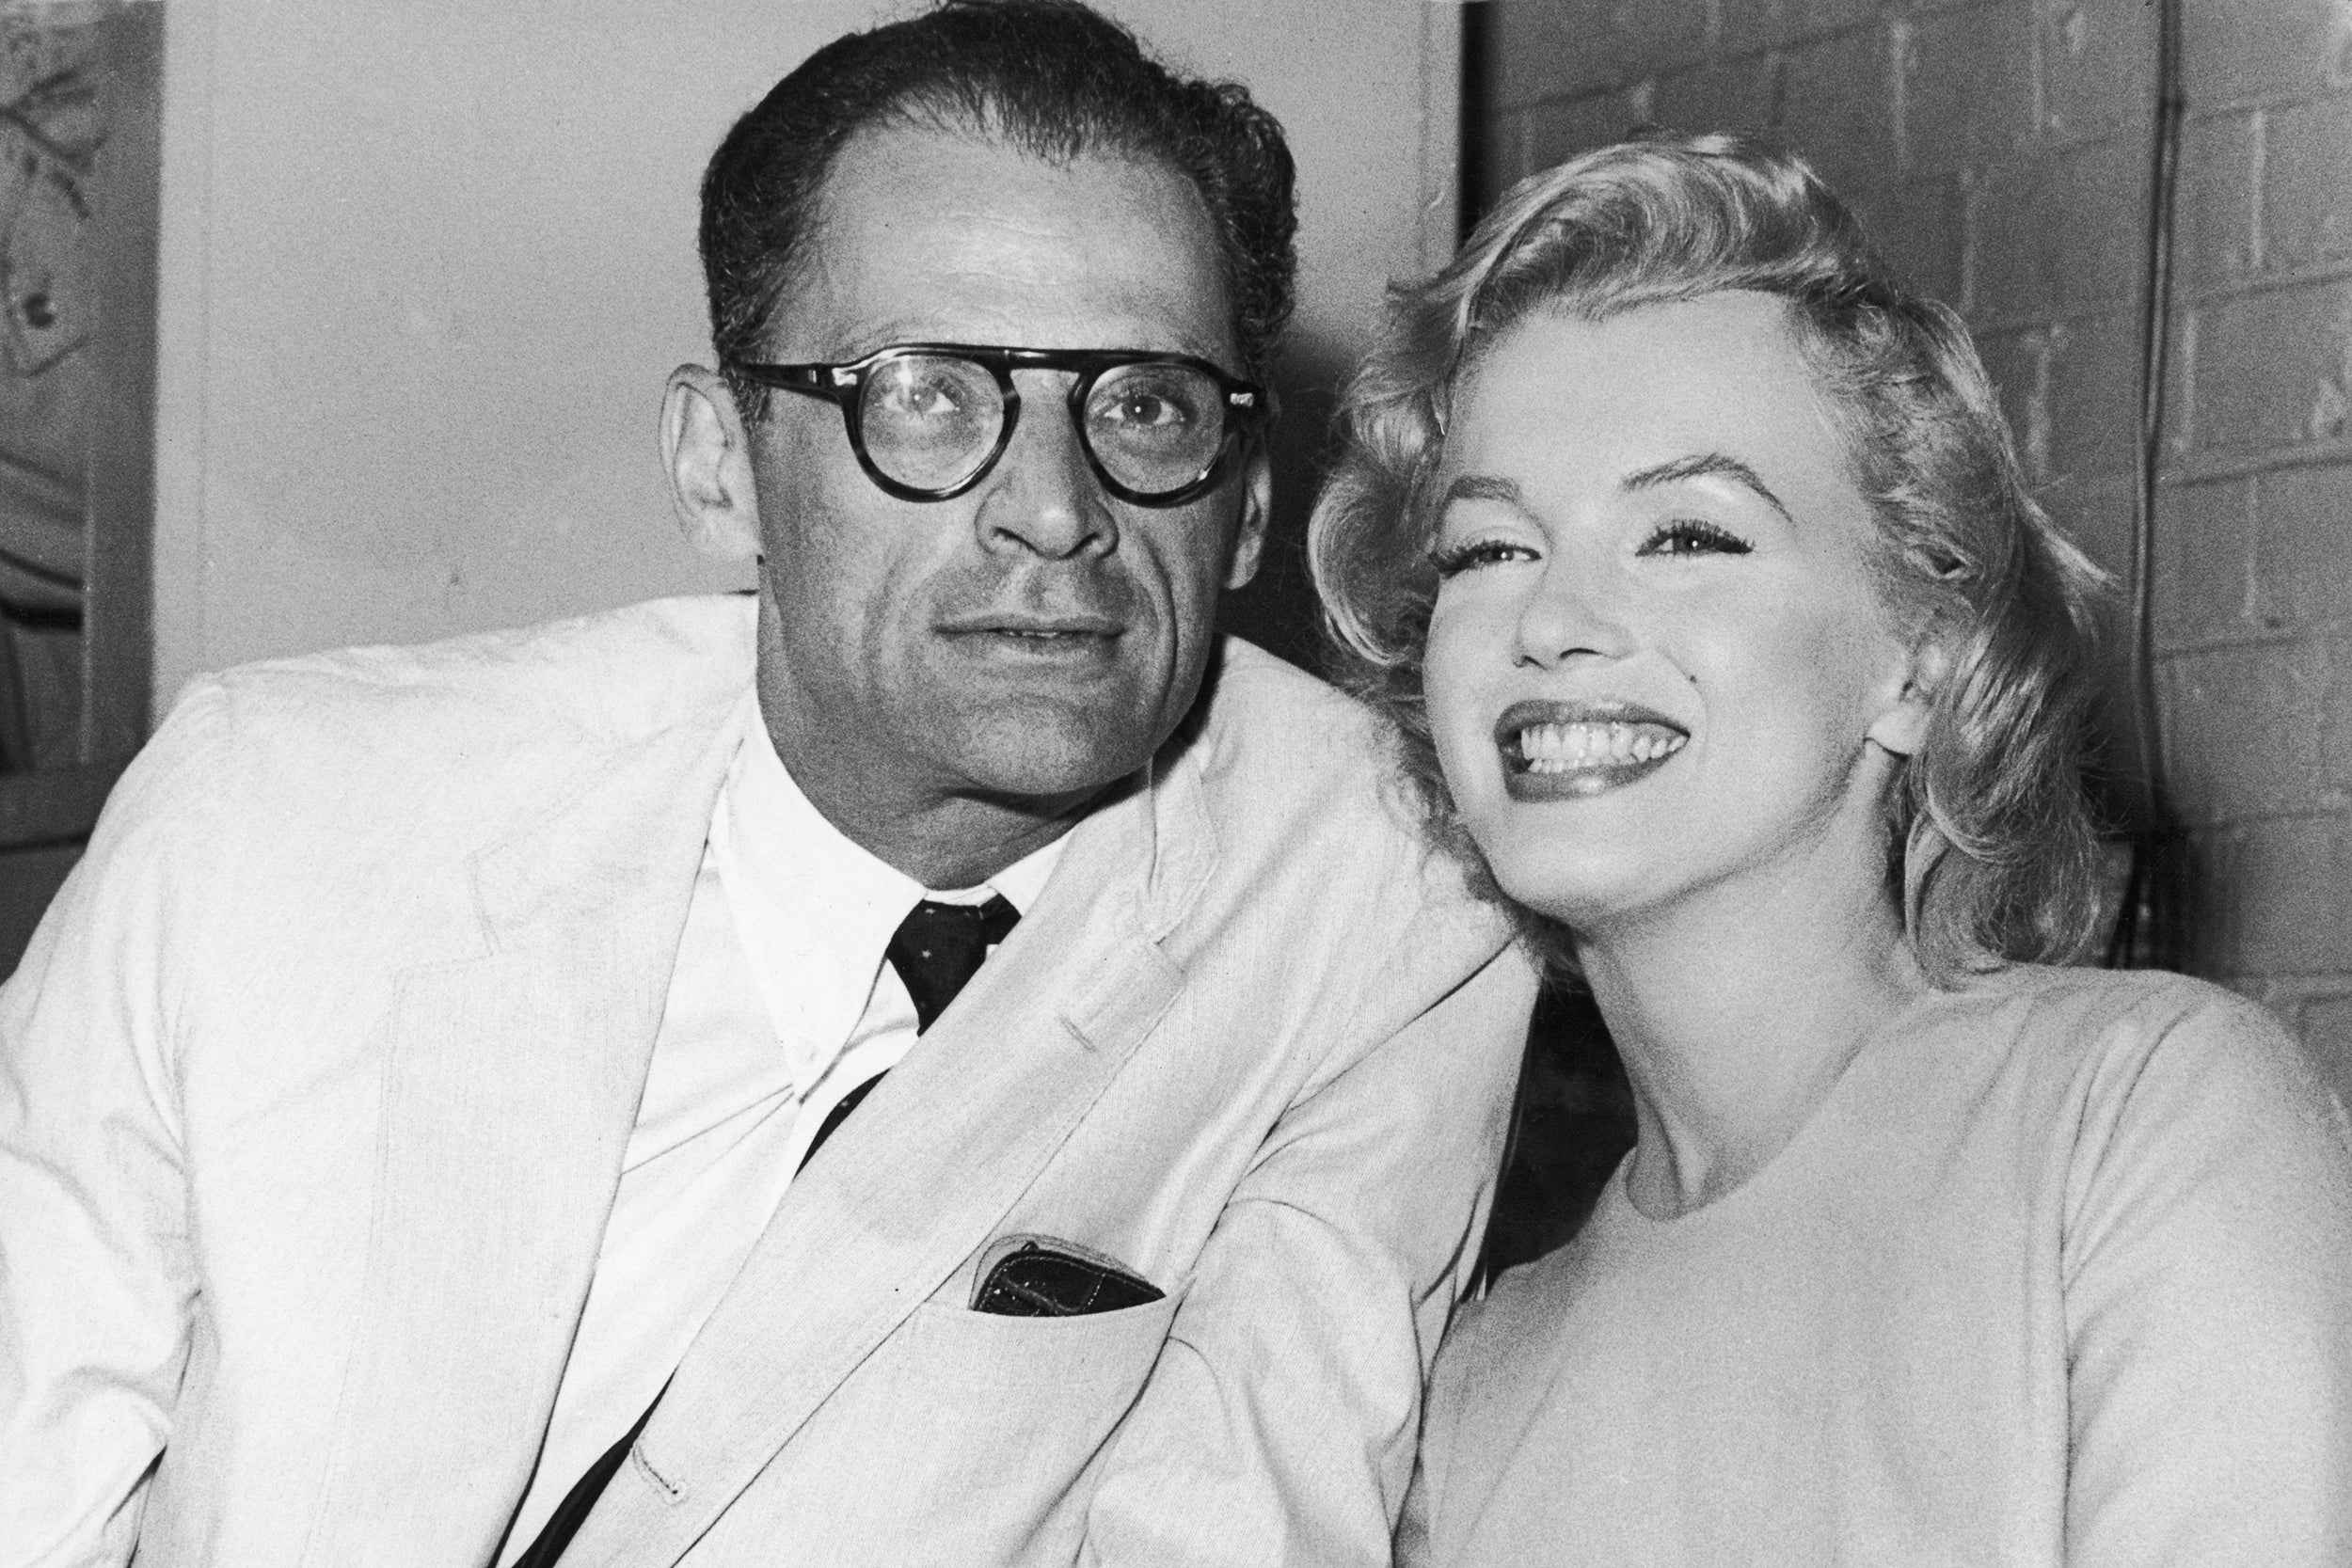 Rebecca Miller found that portraying her father’s passionate romance with Marilyn Monroe was ‘very tricky’